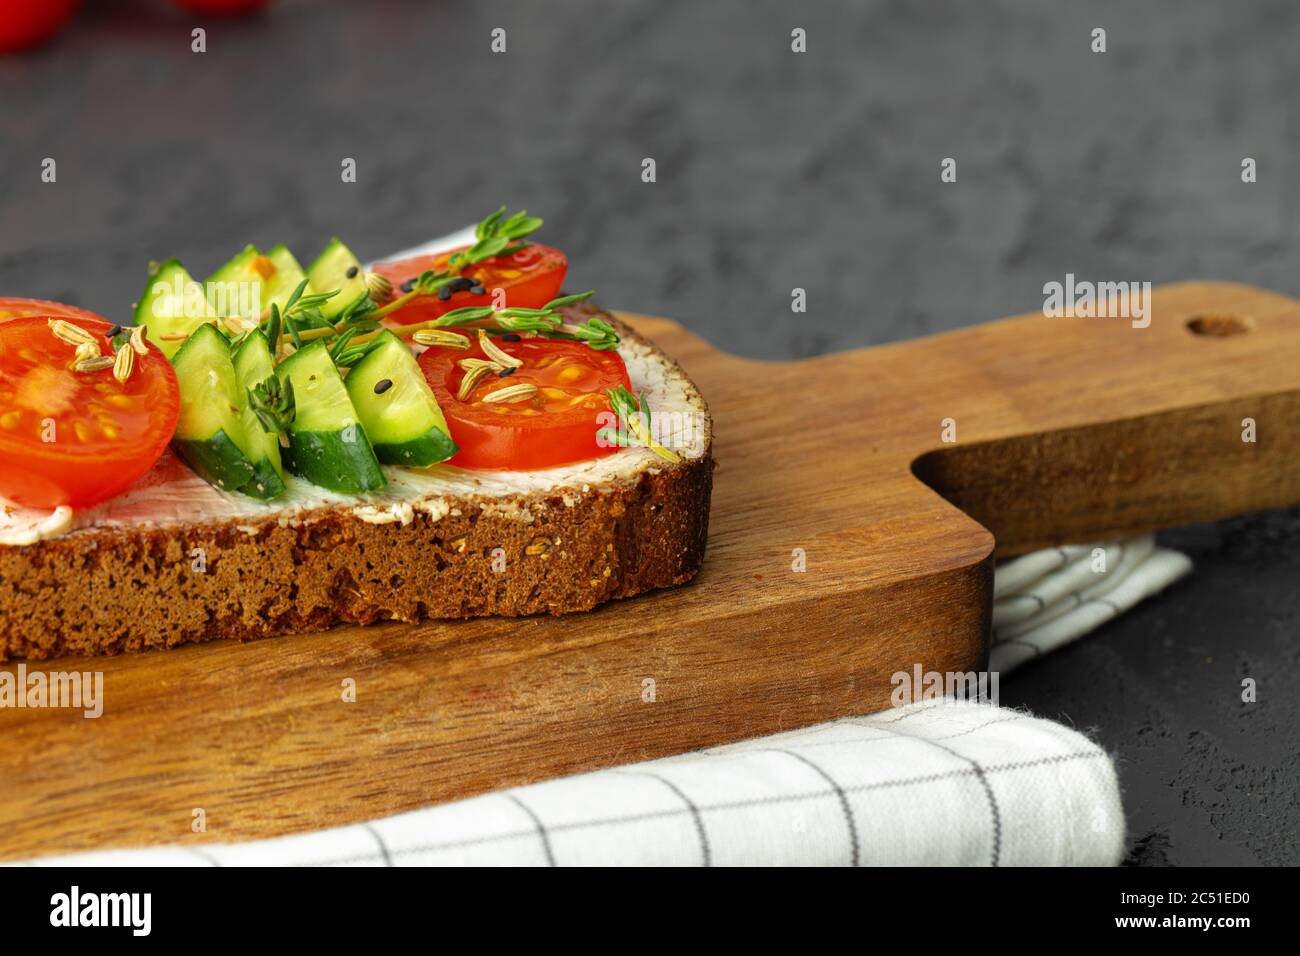 Rye bread sandwich with slices of tomatoes and cucumbers Stock Photo